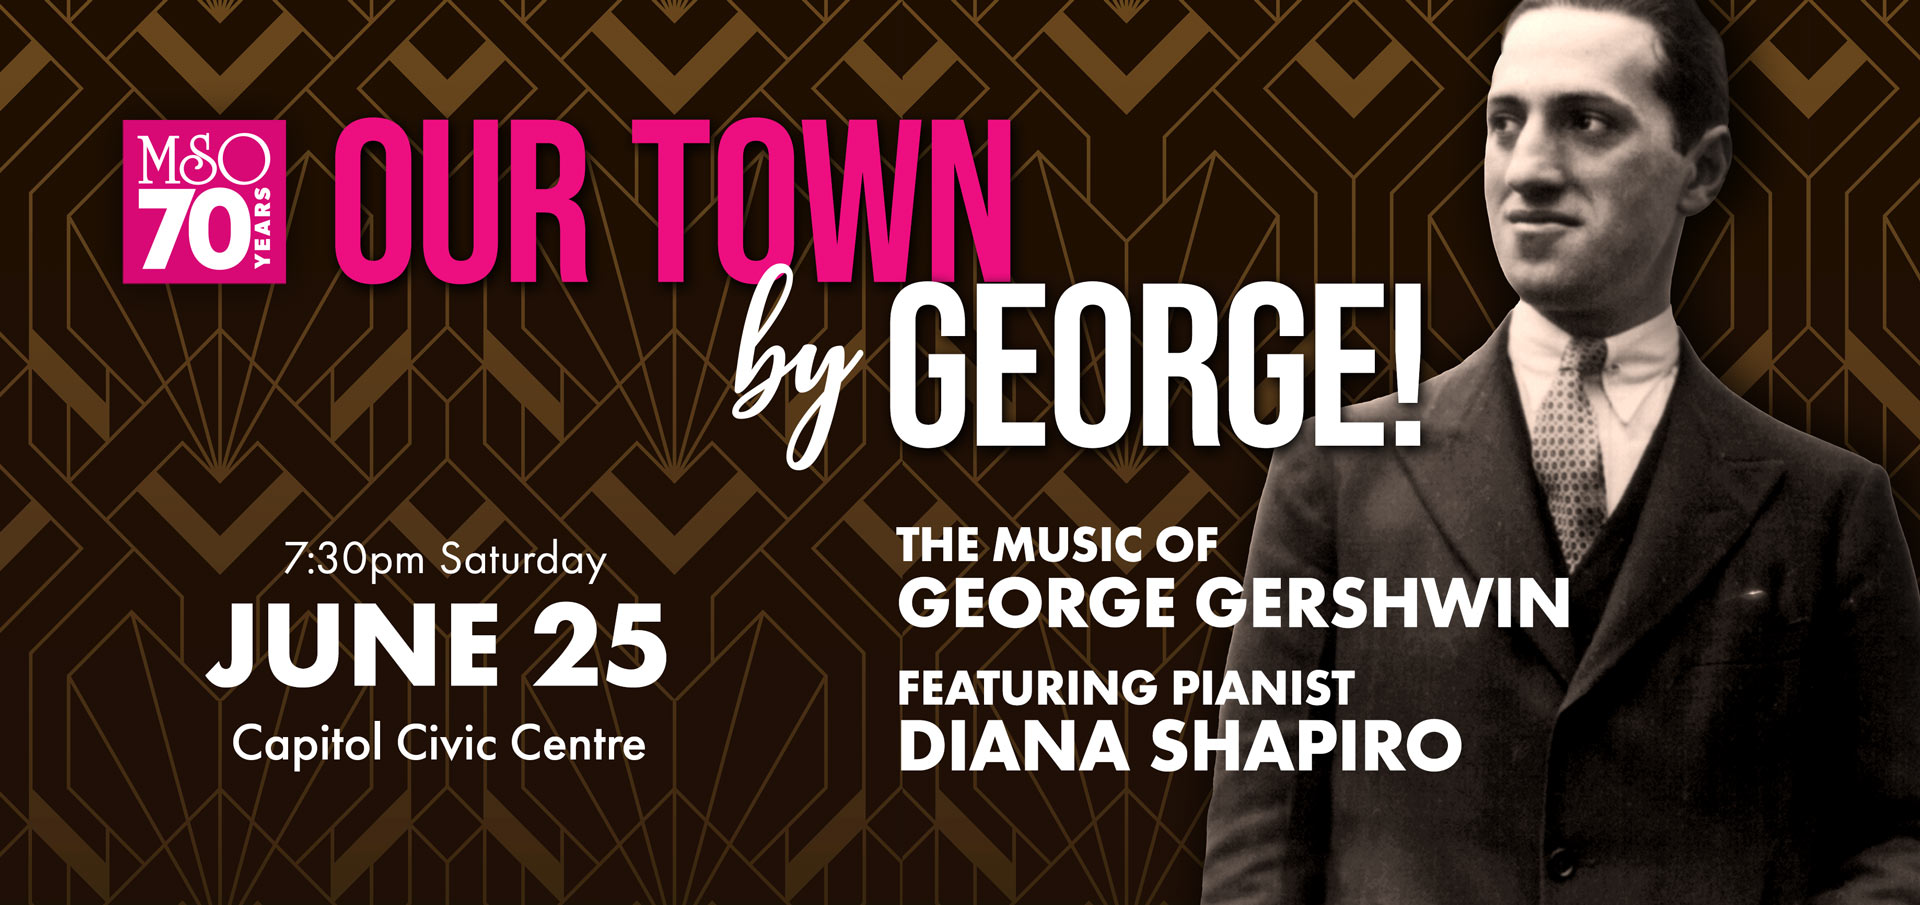 Our Town: By George! June 25, 2022